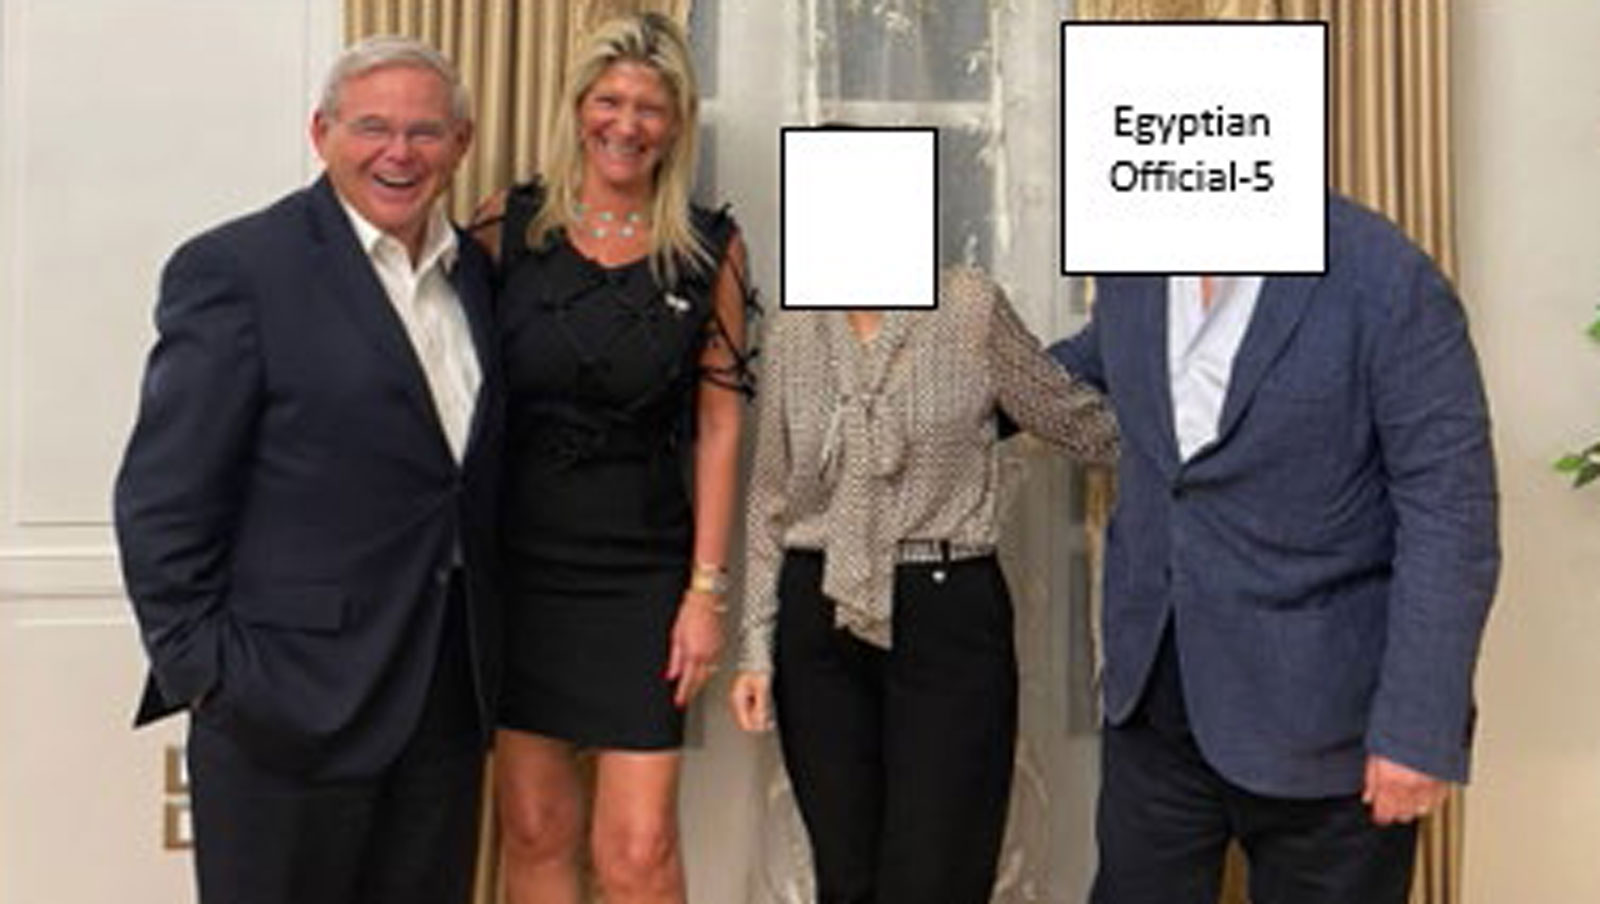 Around October 2021, Sen. Menendez and his wife Nadine met with multiple Egyptian officials on a trip to Egypt, including for a private dinner at the home of Egyptian Official-5.